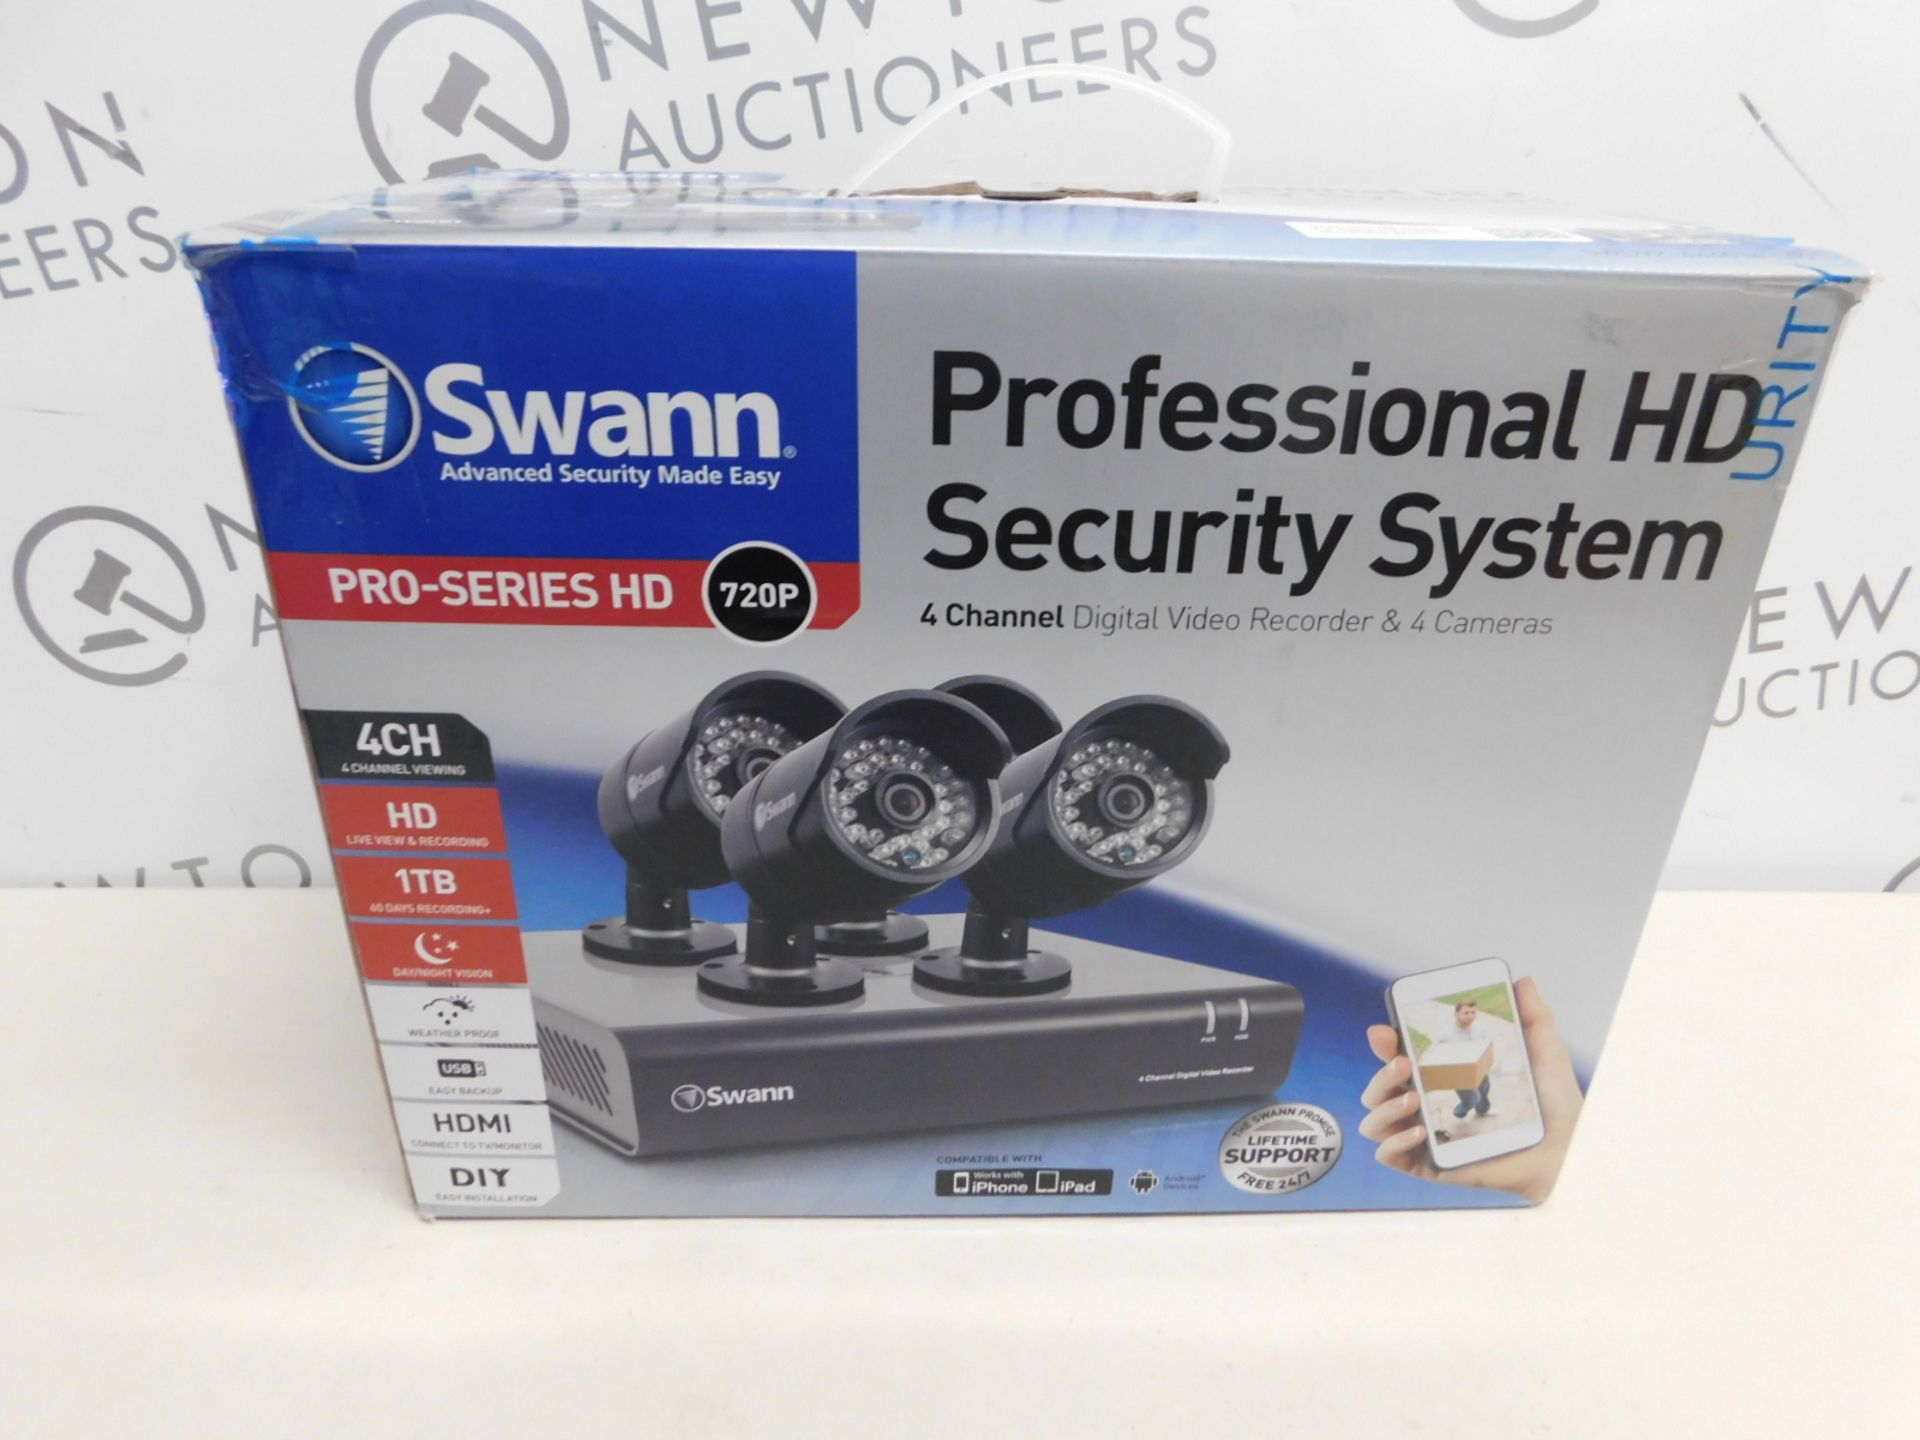 1 BOXED SWANN PRO-SERIES HD SECURITY SYSTEM - DVR4-4400 4CH 720P DIGITAL VIDEO RECORDER & 4 720P